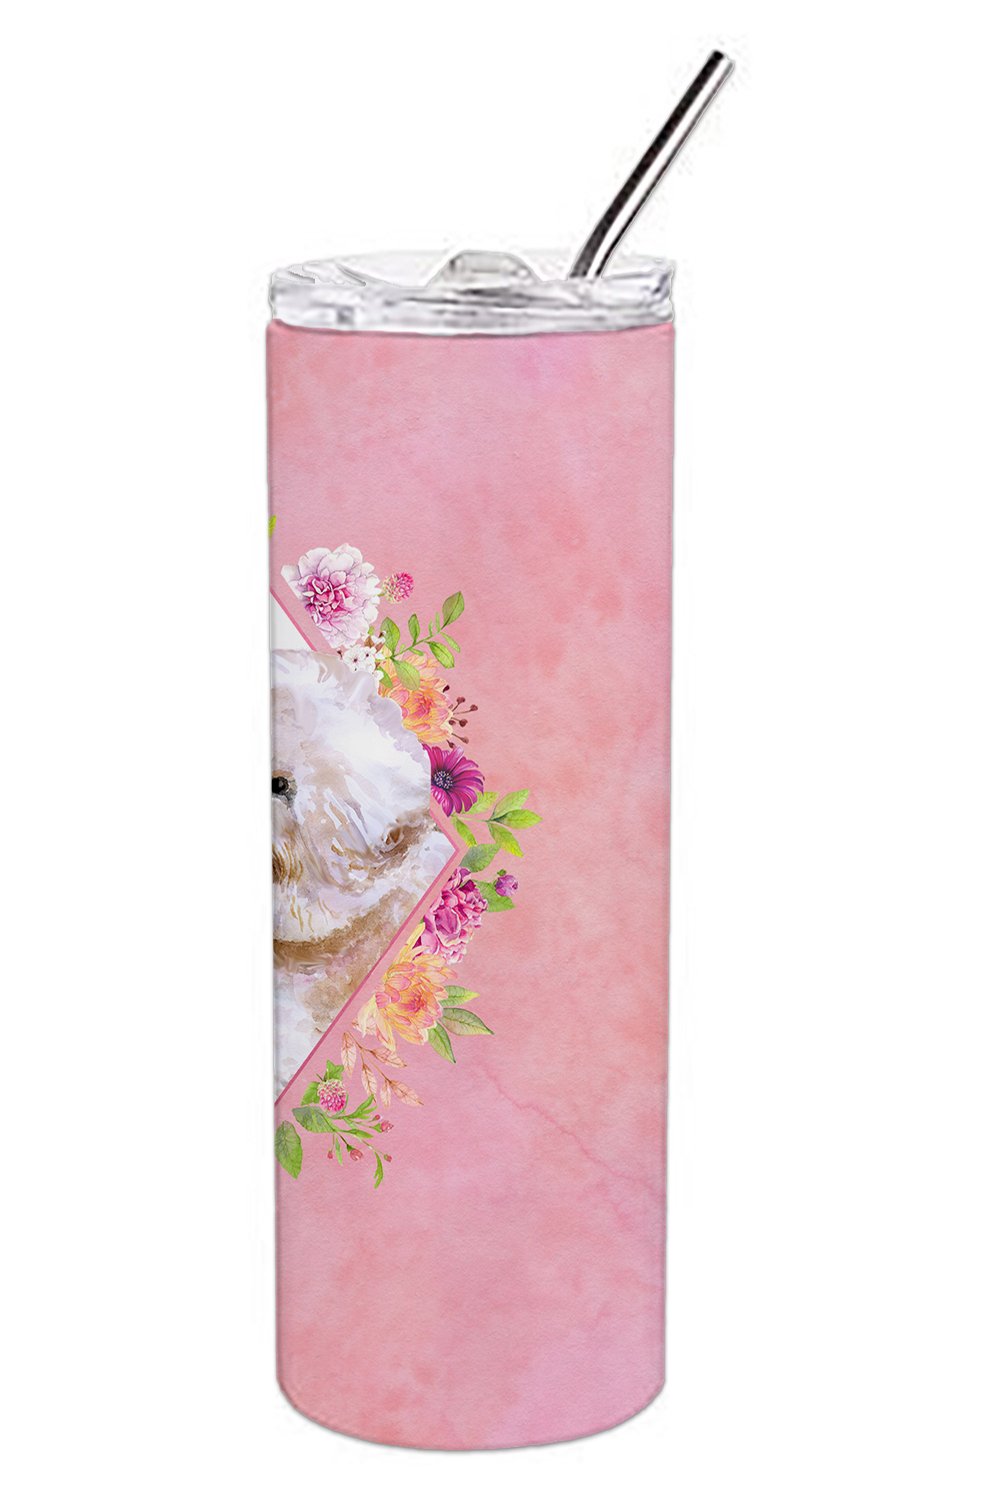 Bichon Frisé #1 Pink Flowers Double Walled Stainless Steel 20 oz Skinny Tumbler CK4119TBL20 by Caroline's Treasures